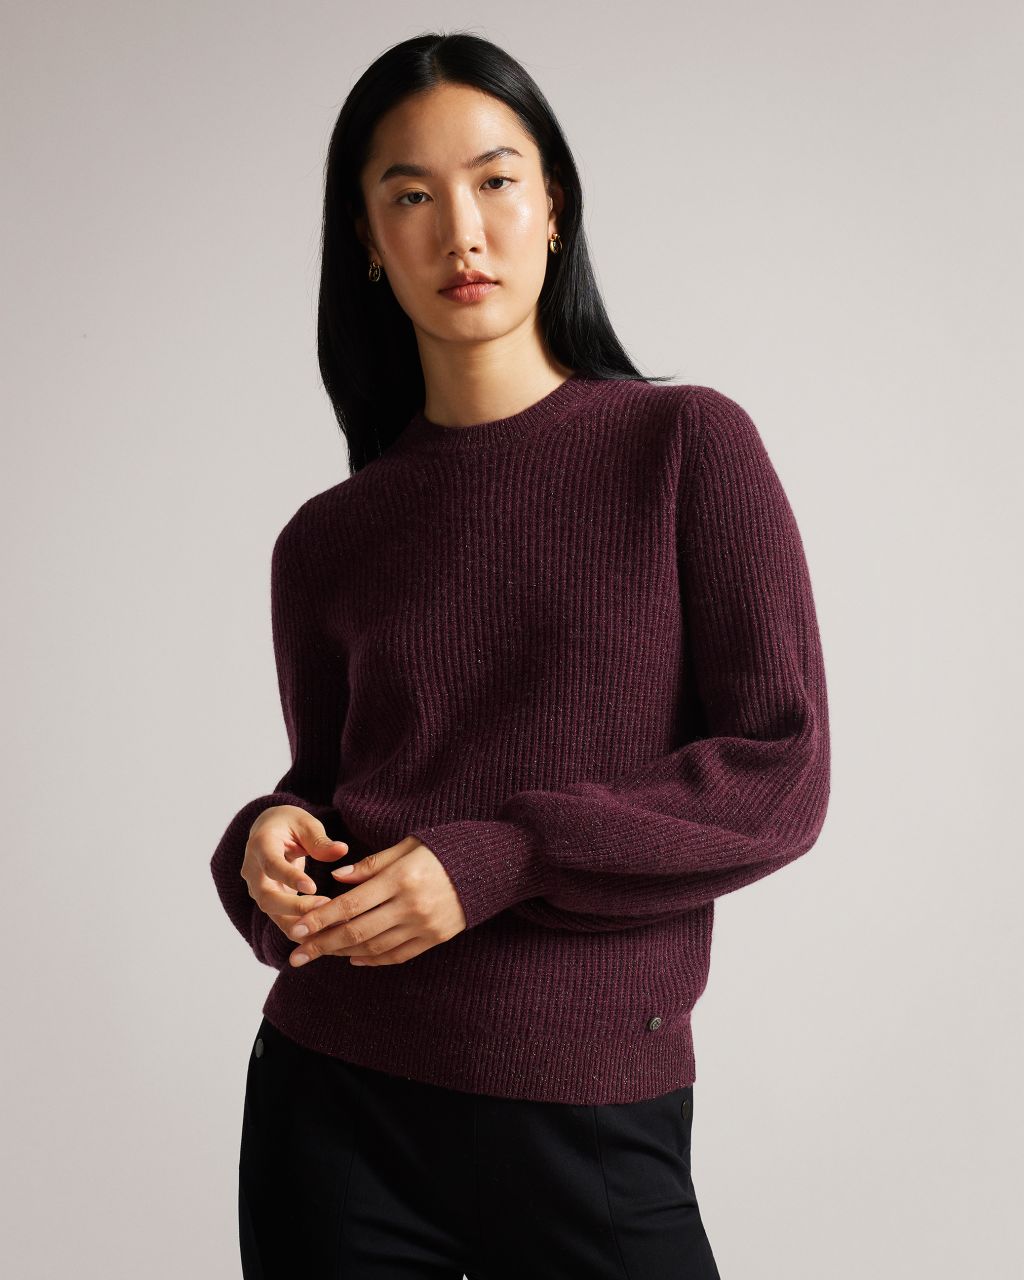 Ted Baker Women's Cashmere And Lurex Blend Jumper in Deep Purple, Giona